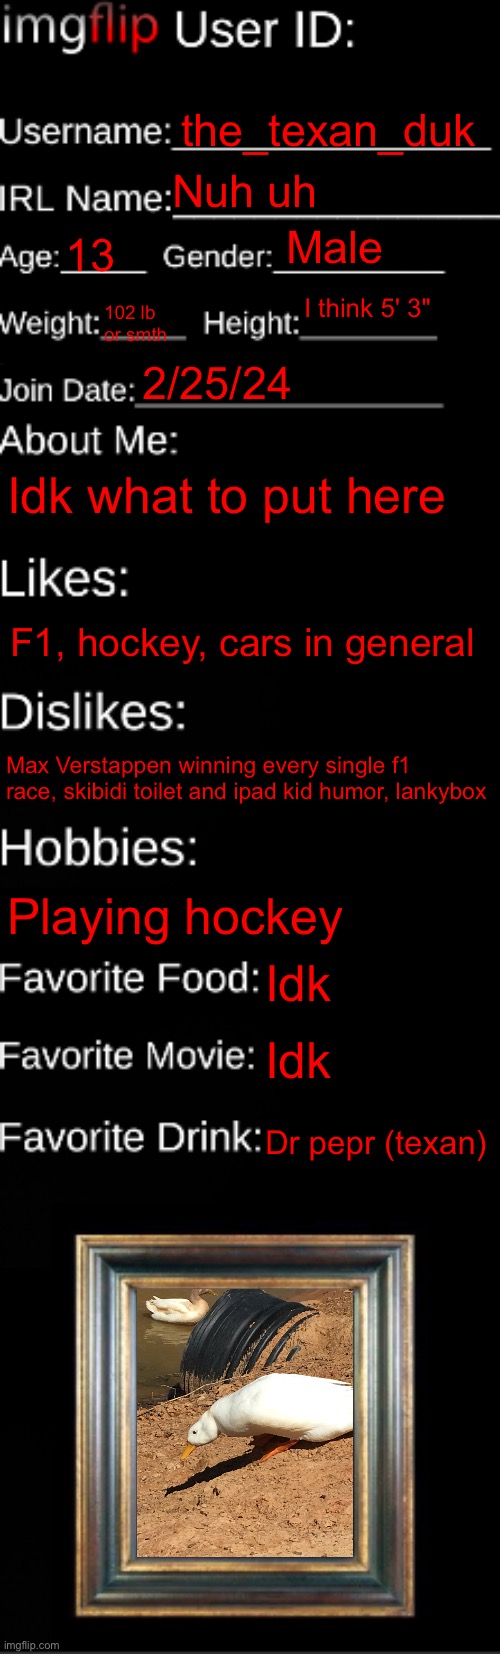 Why did I do this... | the_texan_duk; Nuh uh; Male; 13; I think 5' 3"; 102 lb or smth; 2/25/24; Idk what to put here; F1, hockey, cars in general; Max Verstappen winning every single f1 race, skibidi toilet and ipad kid humor, lankybox; Playing hockey; Idk; Idk; Dr pepr (texan) | image tagged in imgflip id card | made w/ Imgflip meme maker